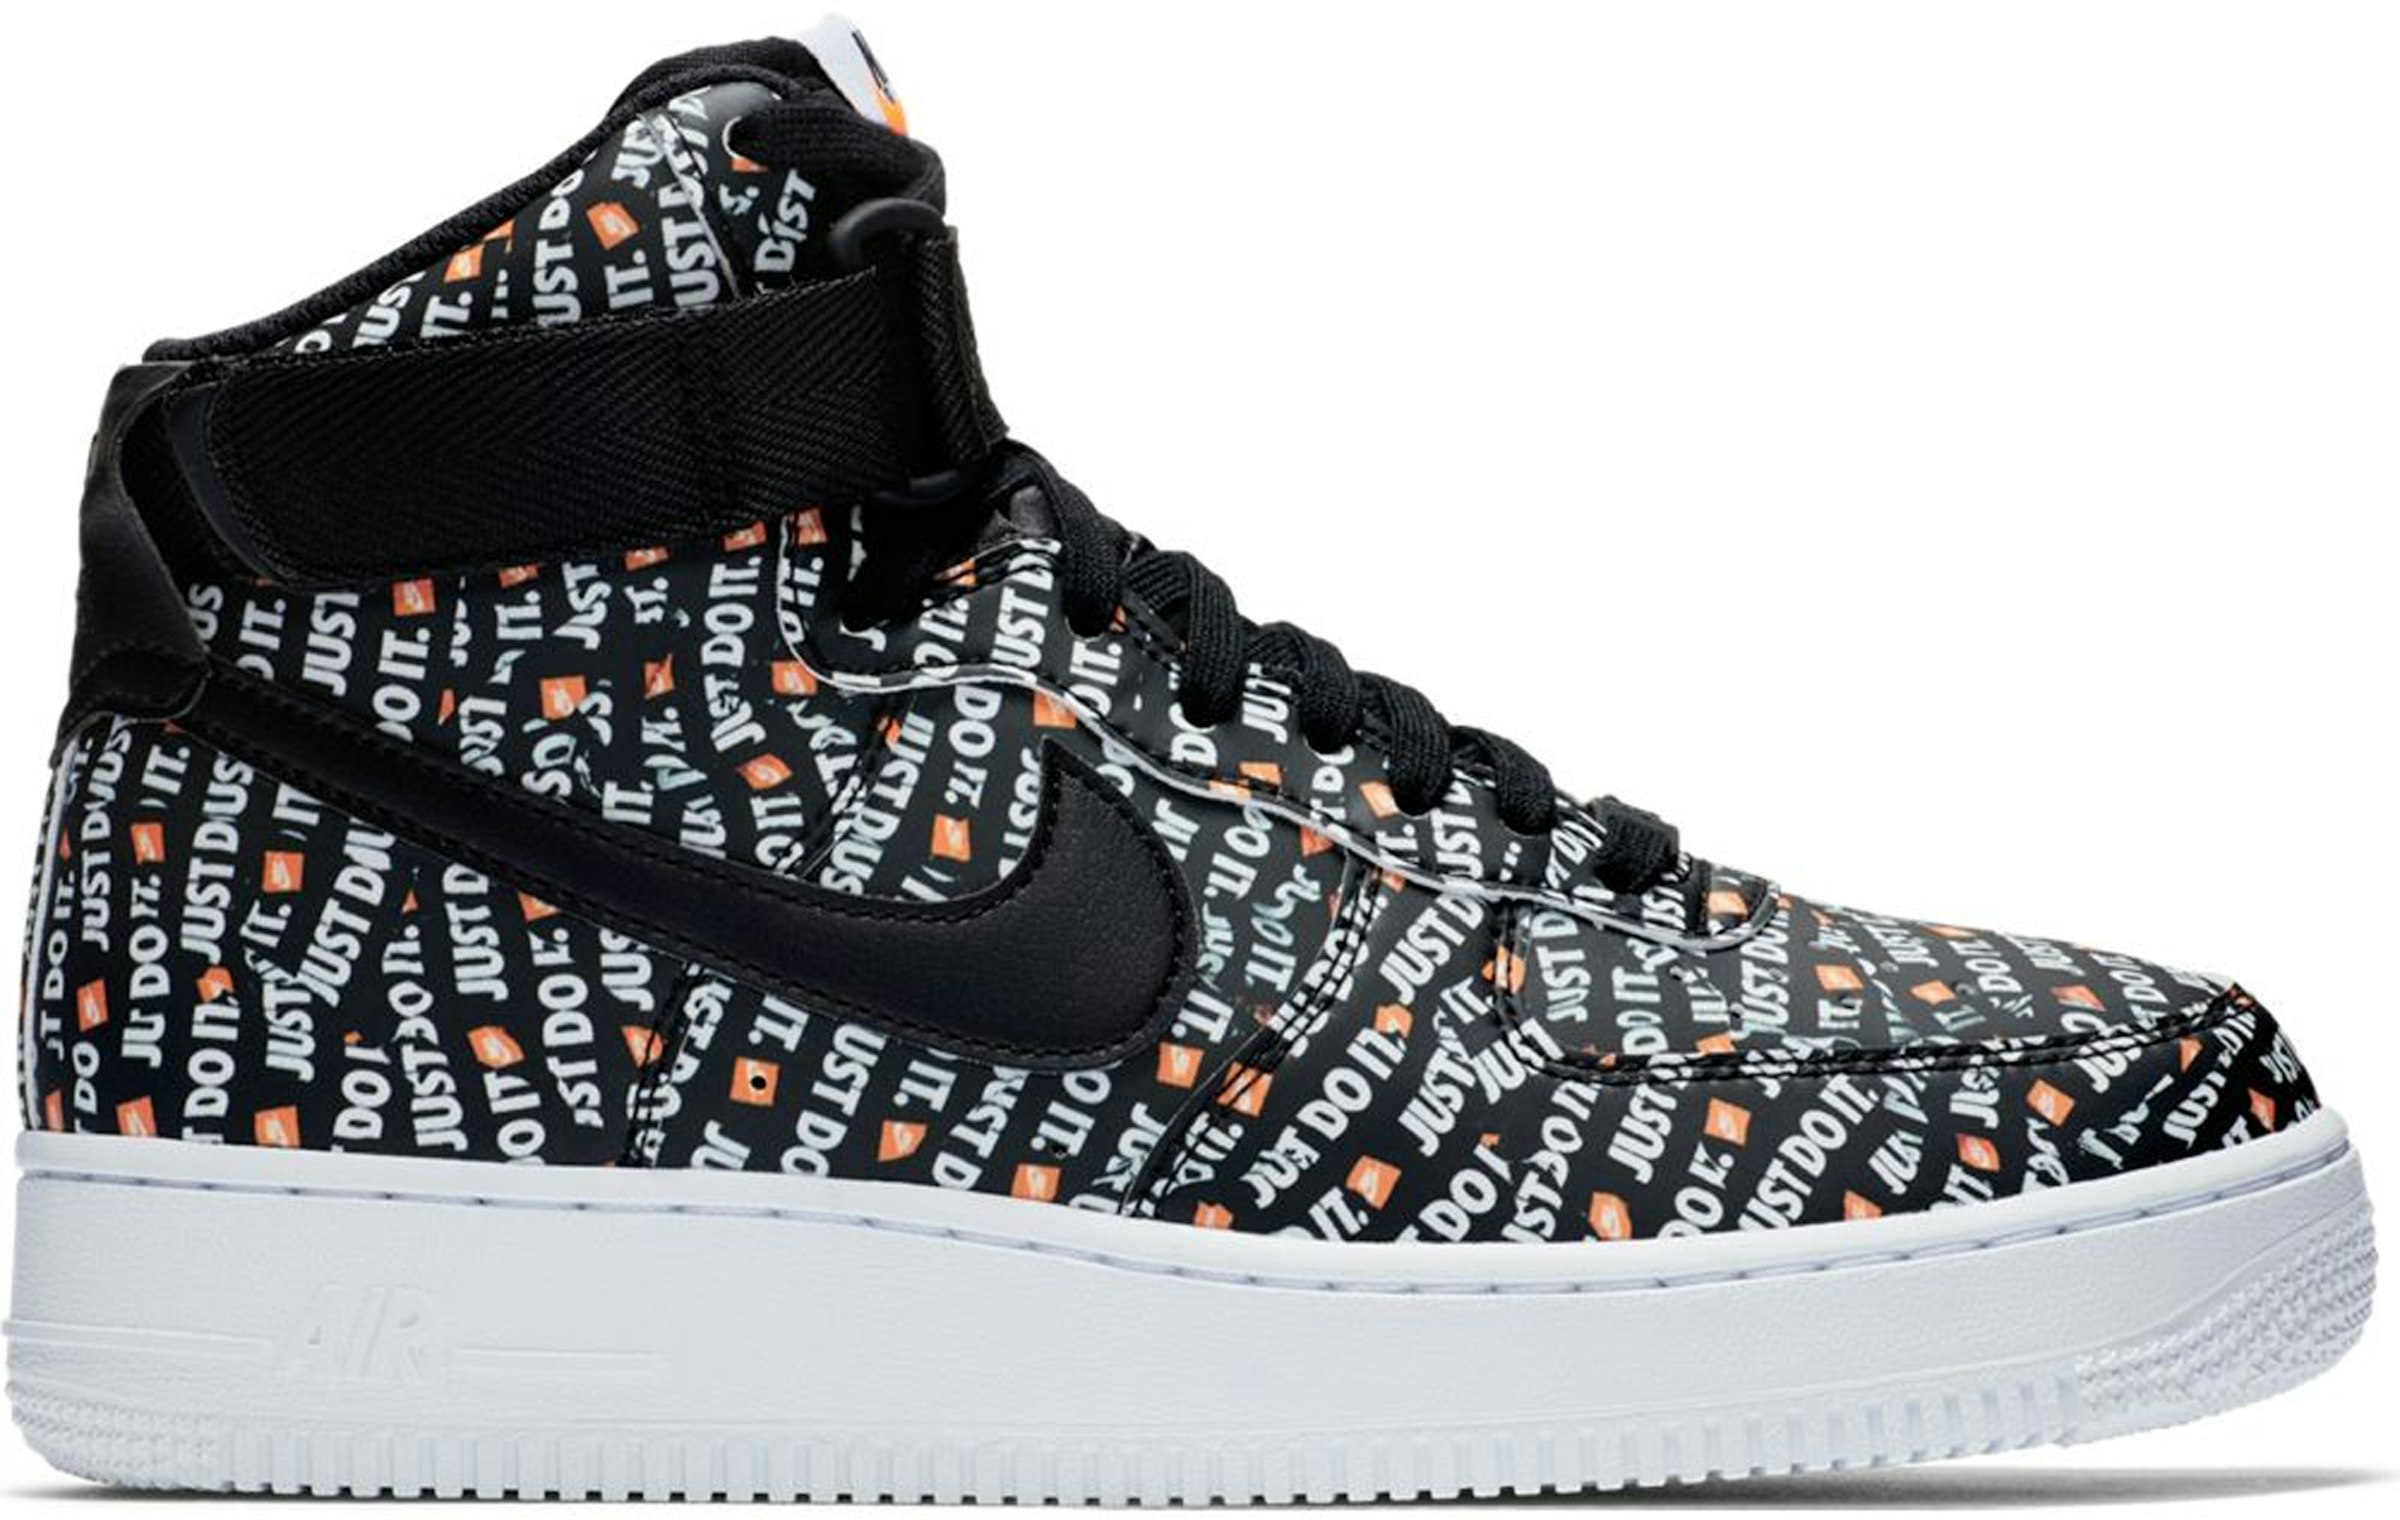 Nike Air Force 1 High Just It Pack Black (Women's) - AO5138-001 - US